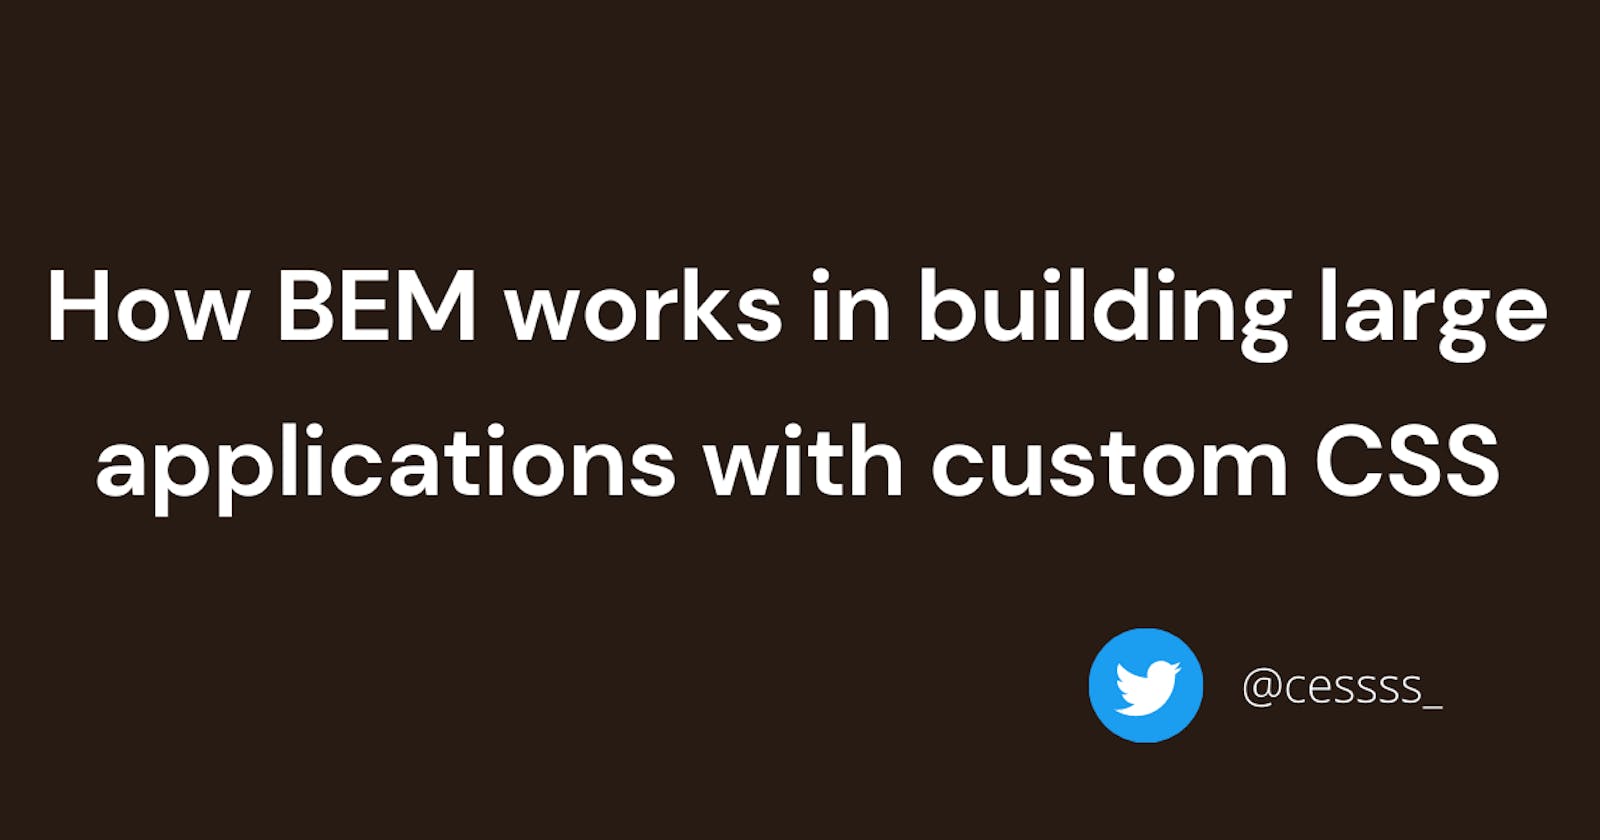 How BEM works in building large applications with custom CSS